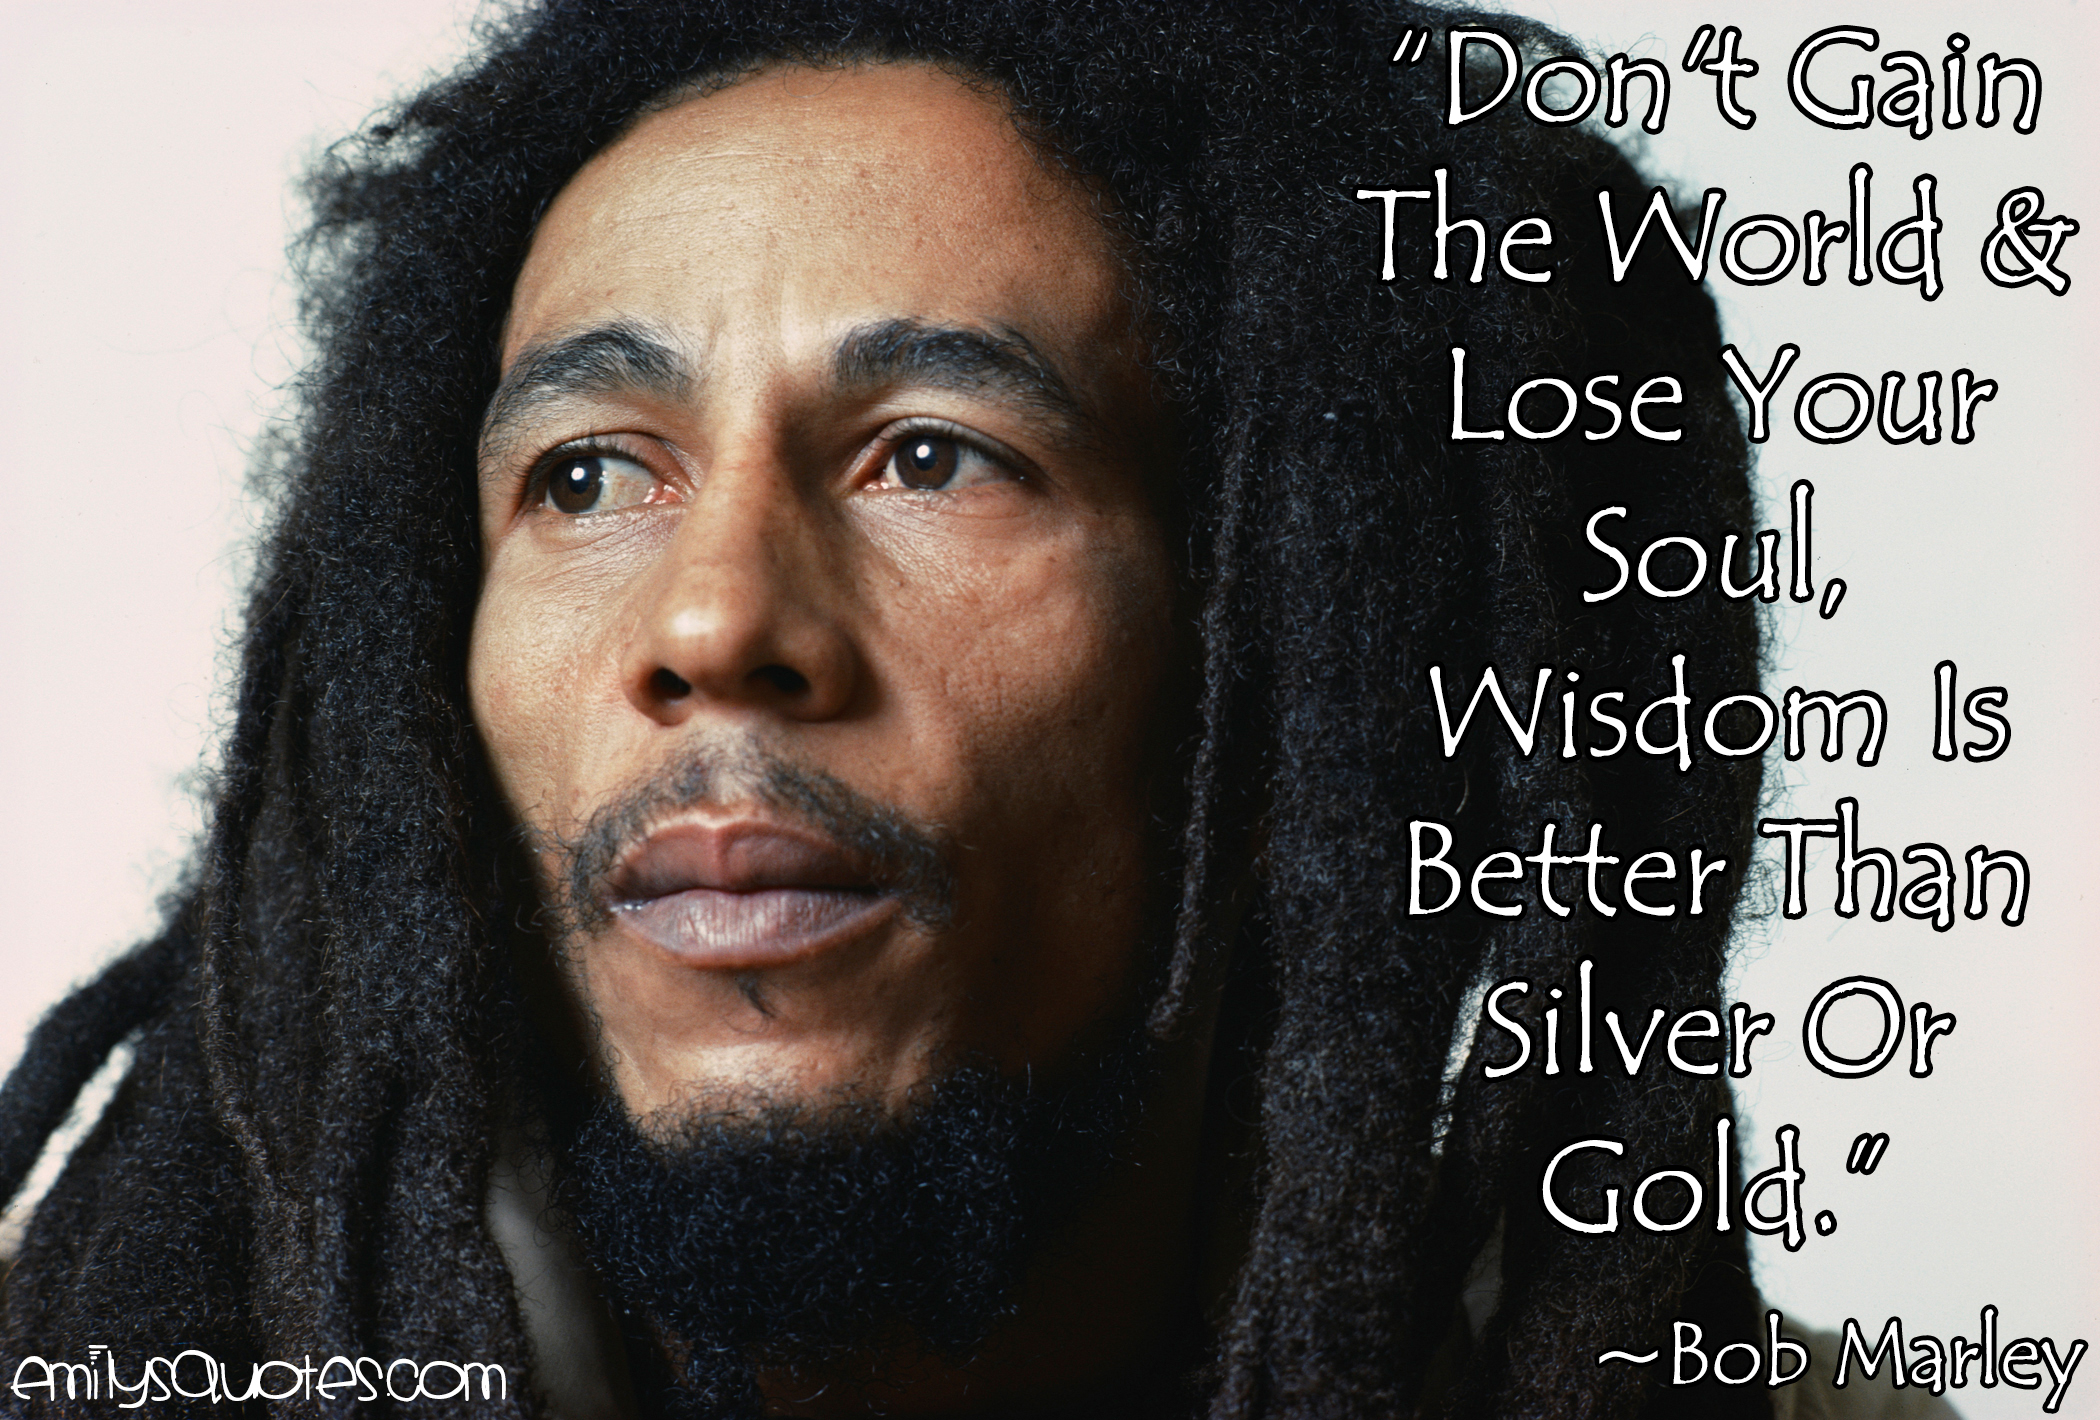 Don’t Gain The World & Lose Your Soul, Wisdom Is Better Than Silver Or Gold